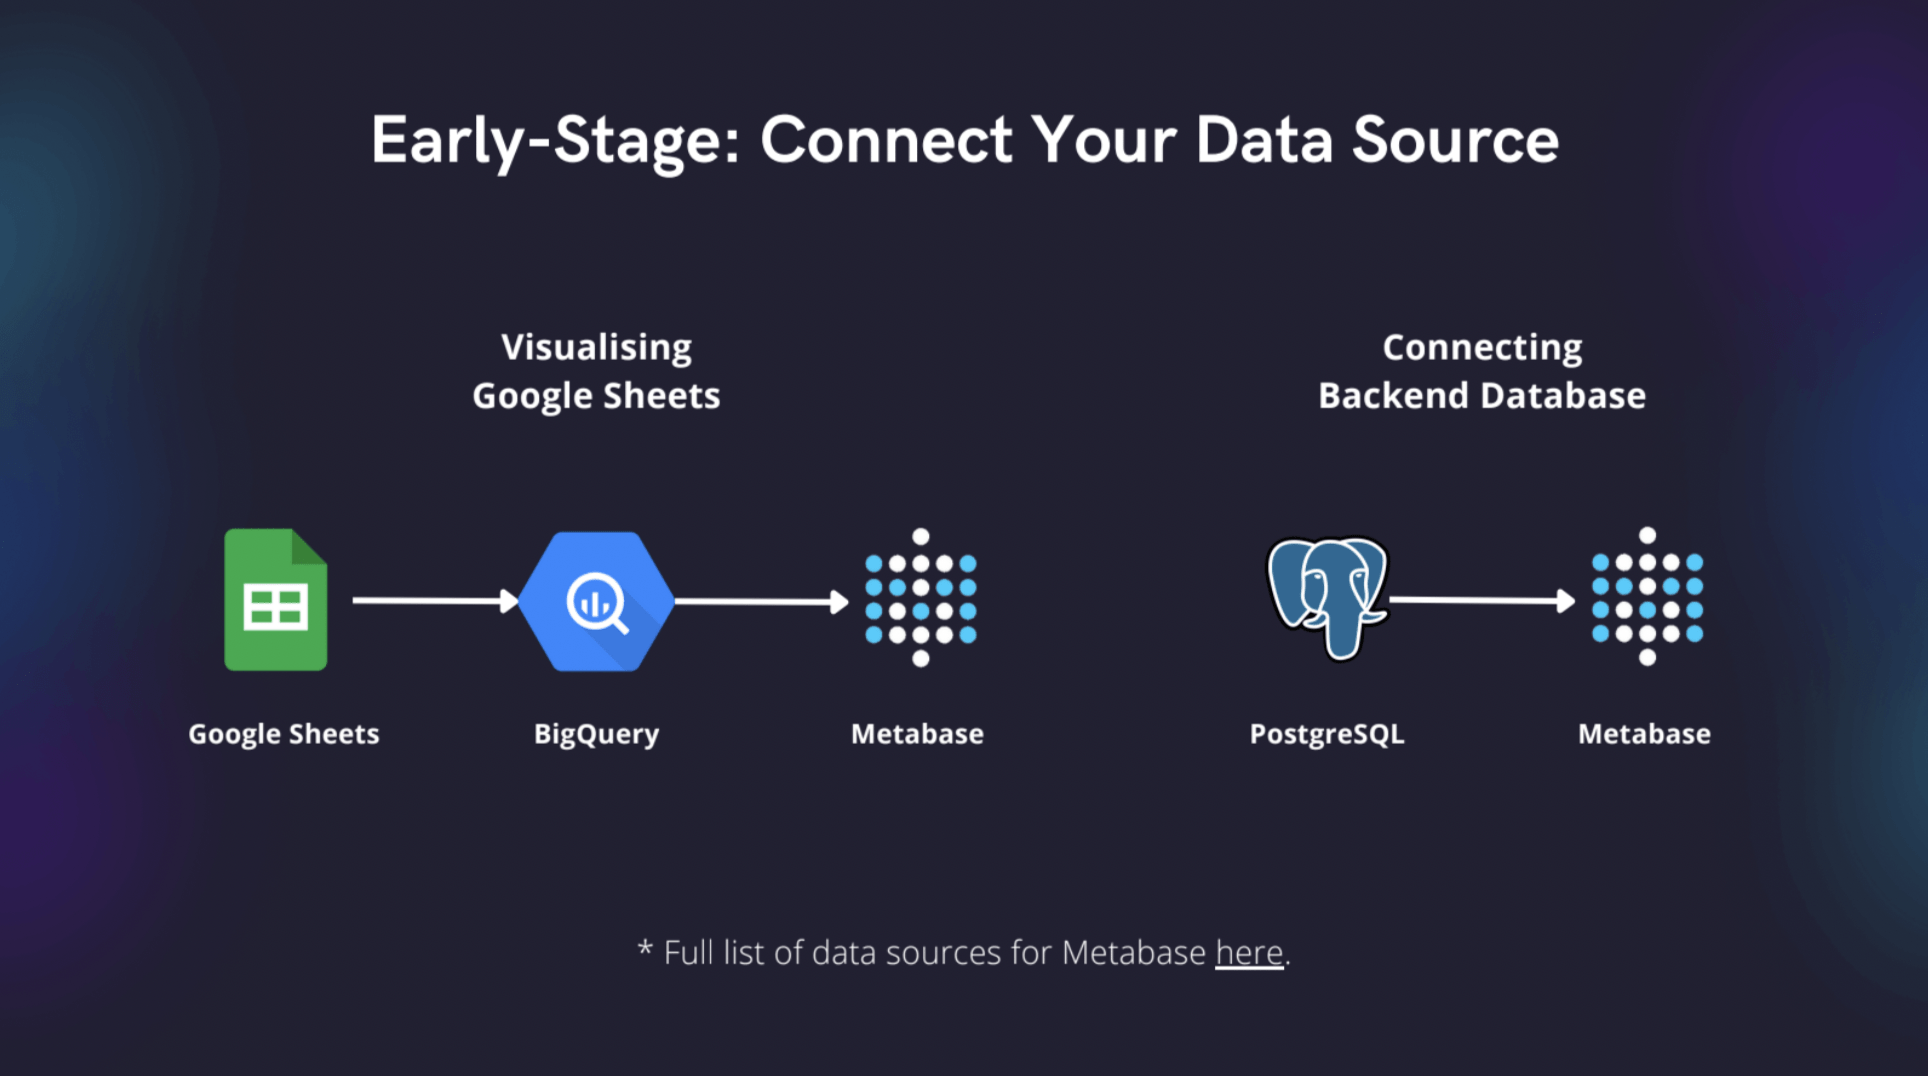 Data sources at the early stage